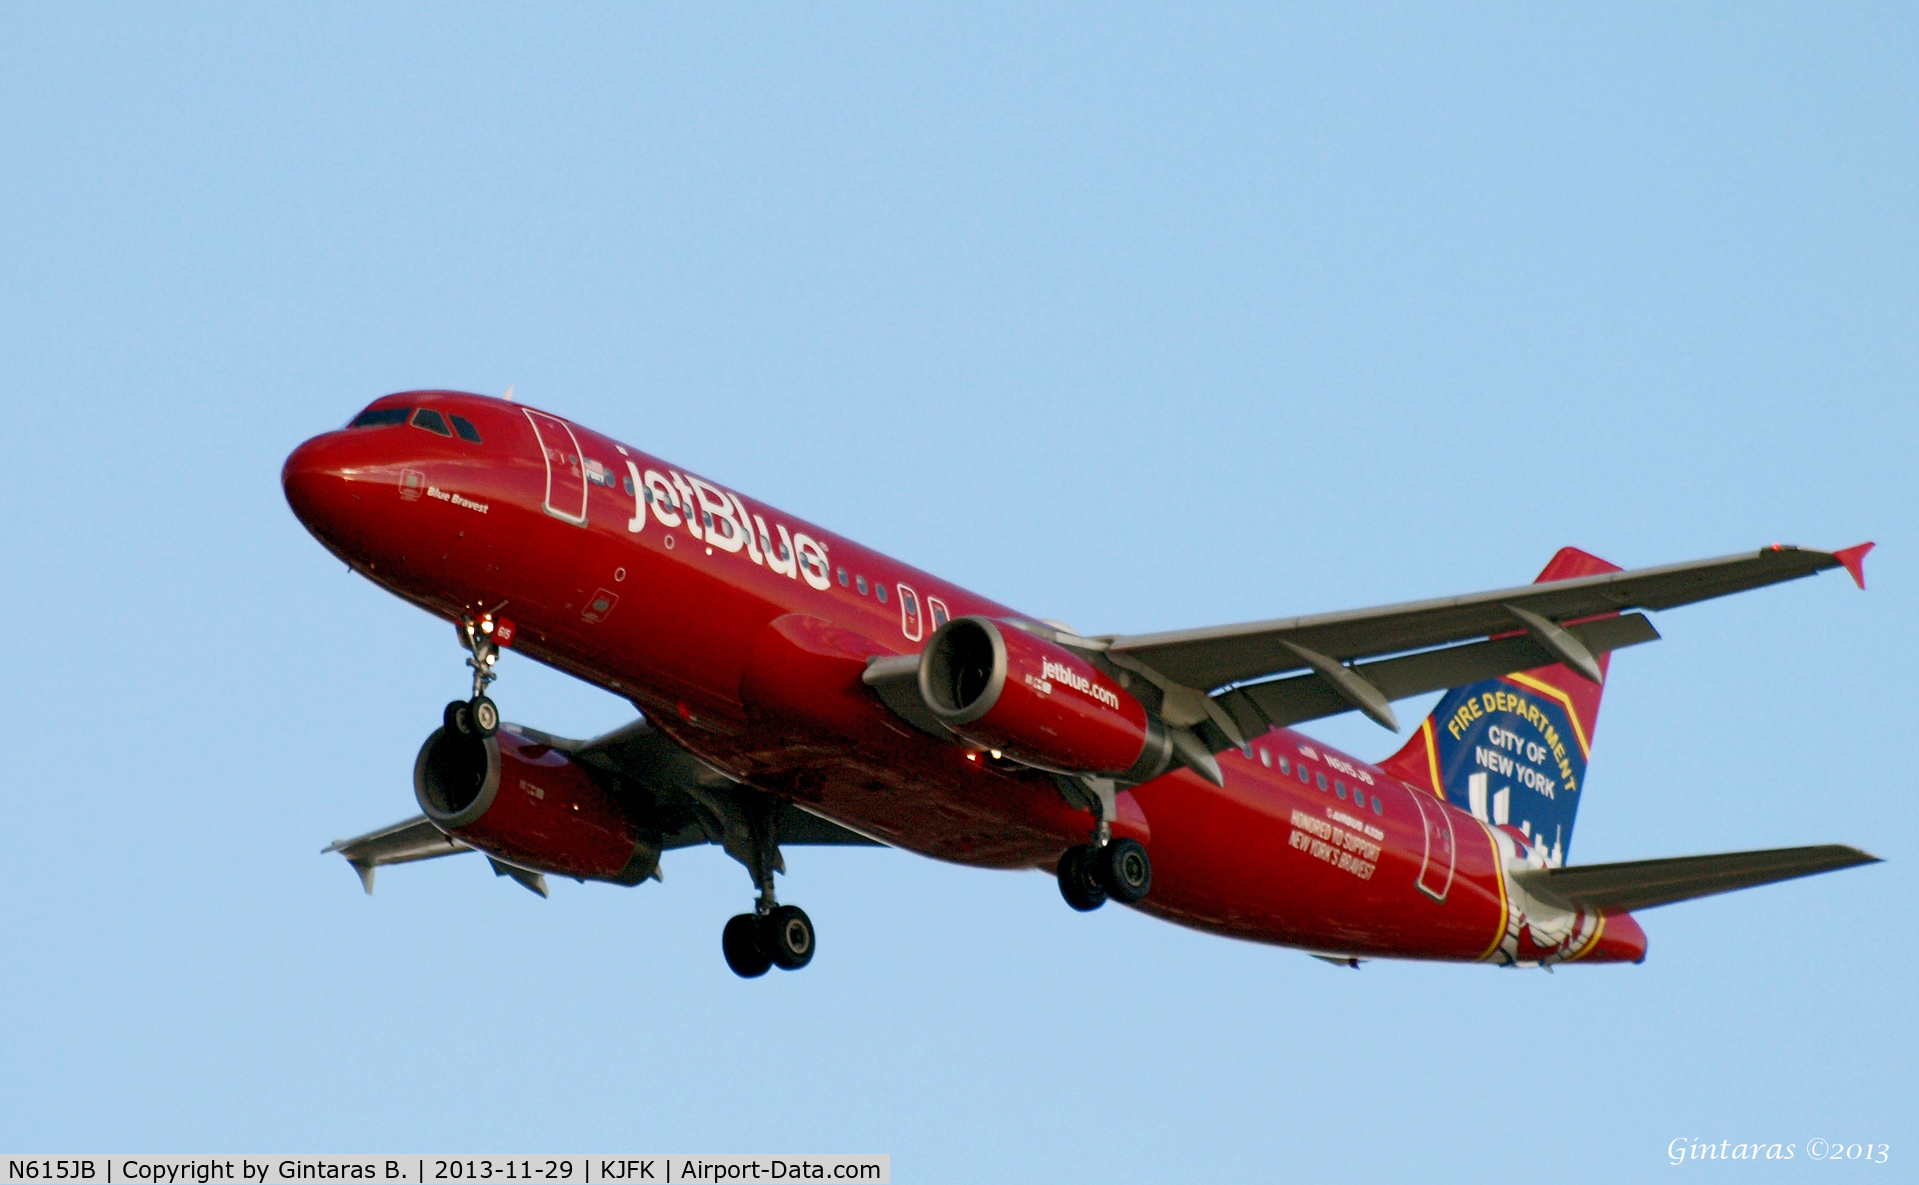 N615JB, 2005 Airbus A320-232 C/N 2461, FDNY Blue Bravest Going To A Landing on 31R, JFK